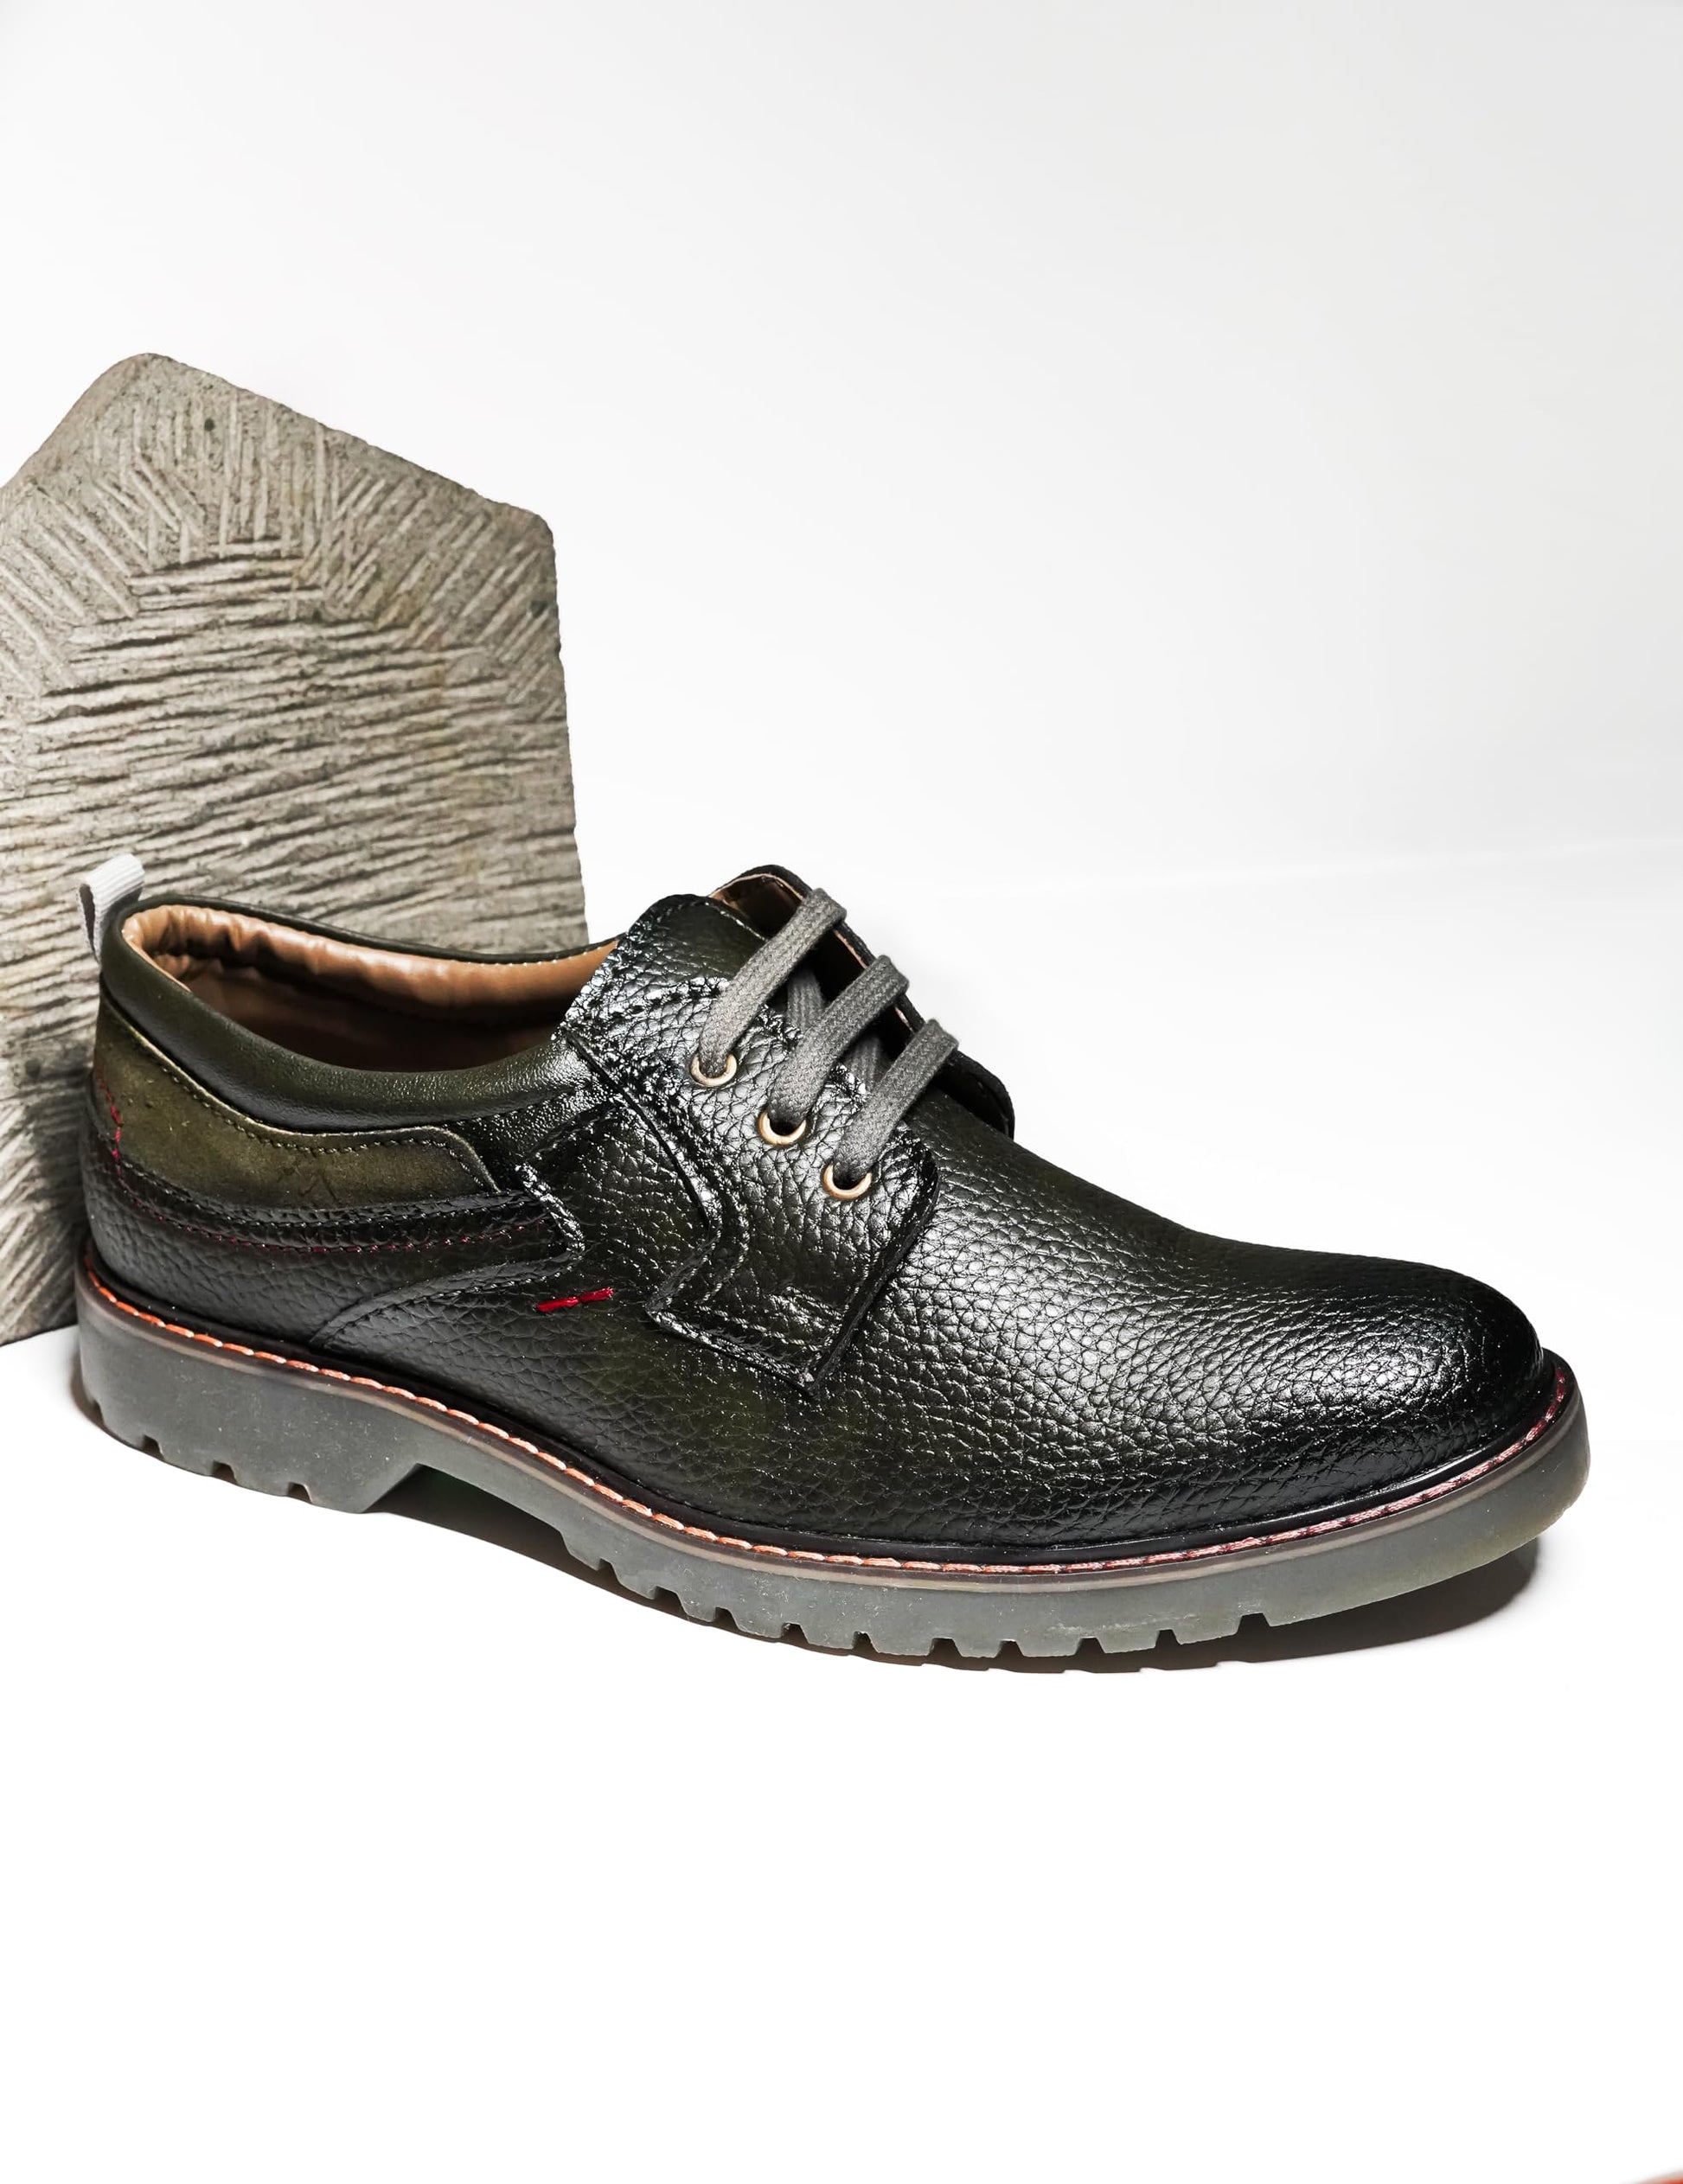 Buckaroo: Stefan Premium Vegan Synthetic Olive Casual Shoes for Mens 